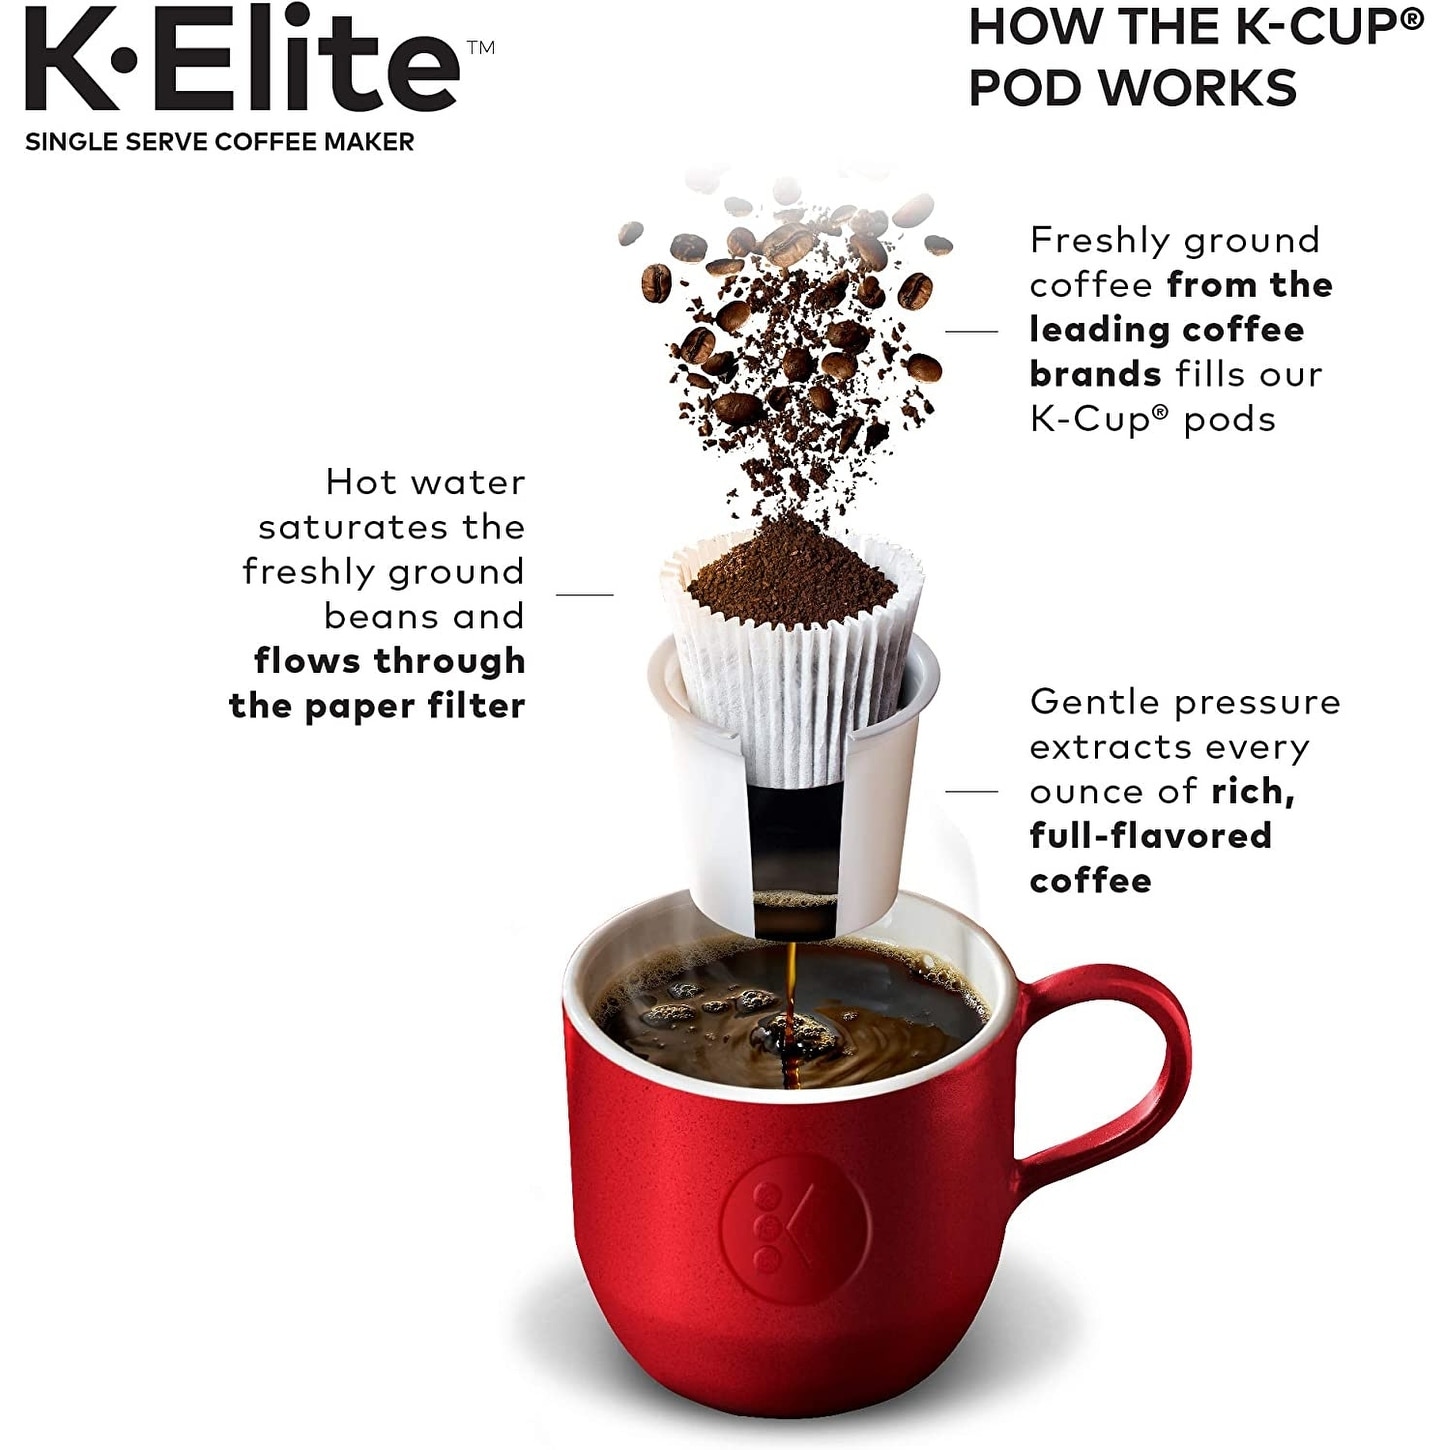 https://ak1.ostkcdn.com/images/products/is/images/direct/add862586304b3be12bc4eacf63f735f87394757/Keurig-K-Elite-Coffee-Maker%2C-Single-Serve-K-Cup-Pod-Coffee-Brewer%2C-With-Iced-Coffee-Capability.jpg